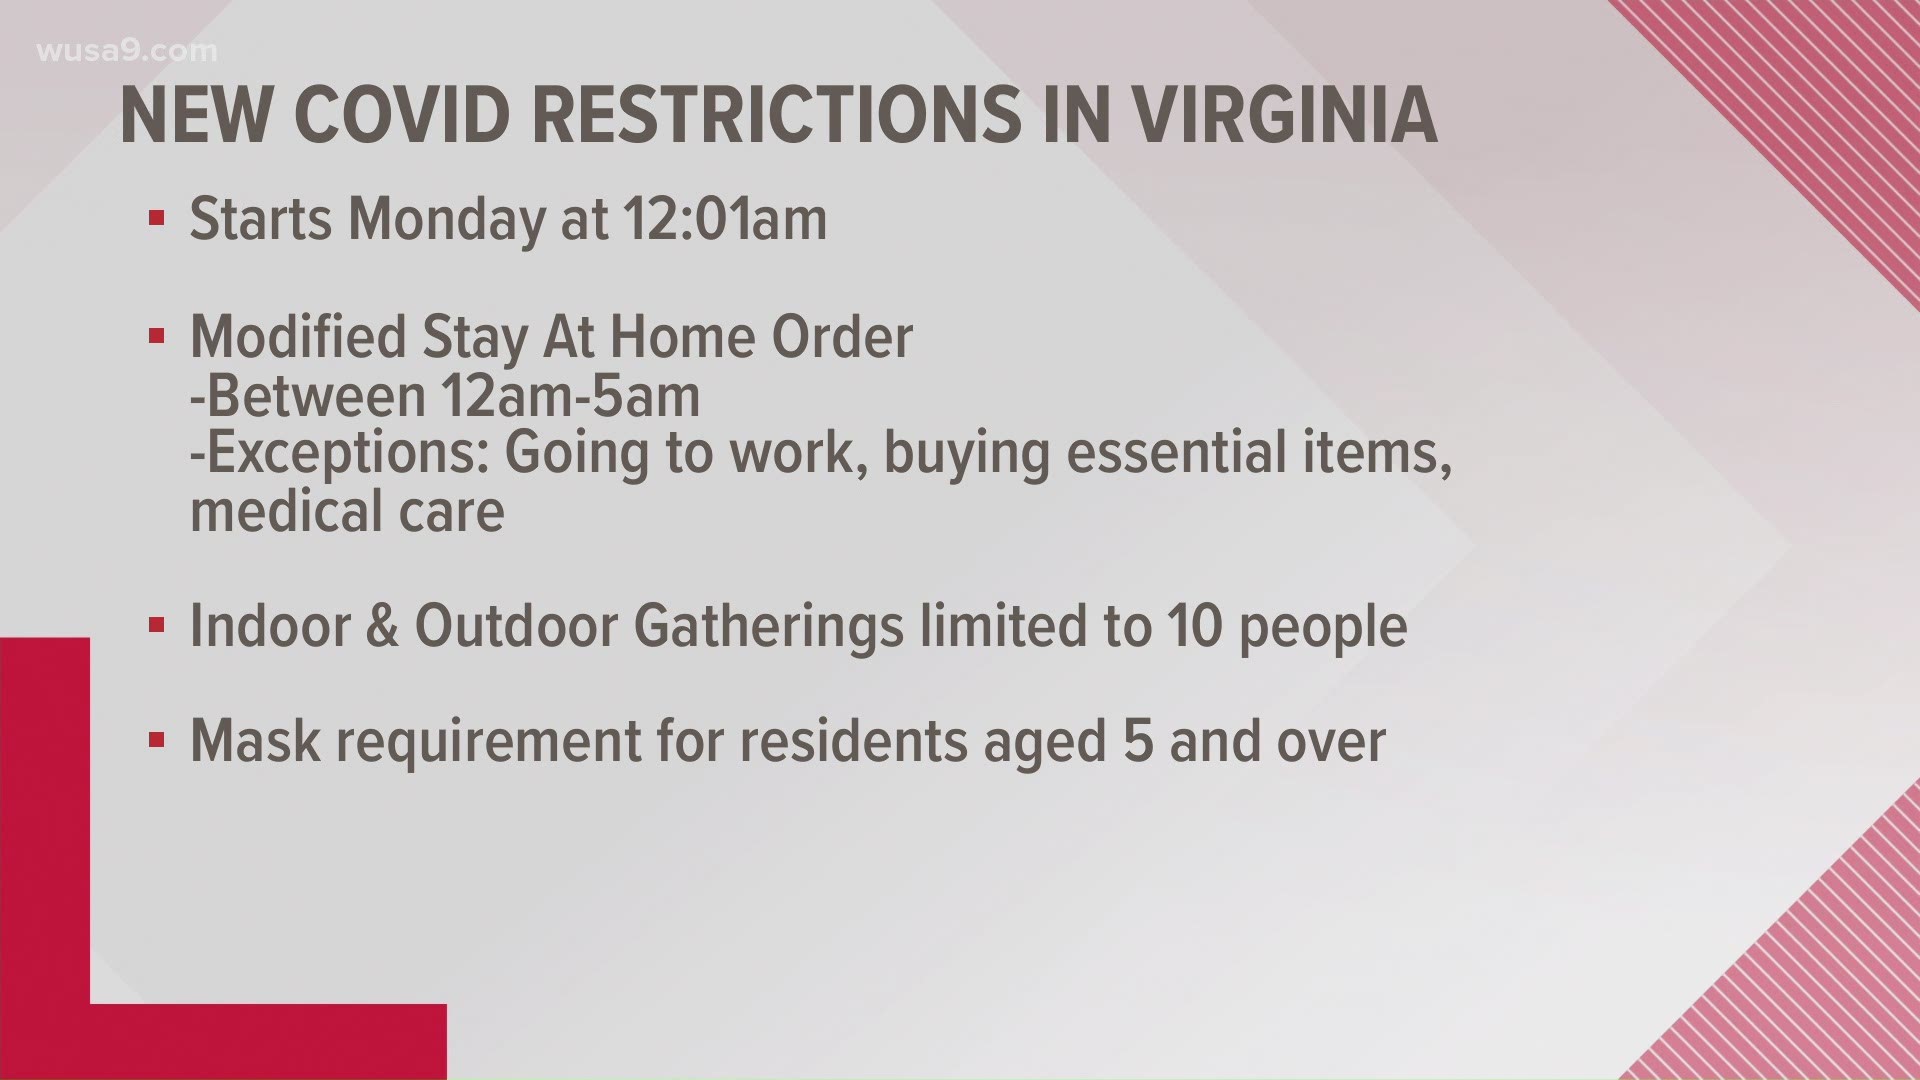 The new modified stay-at-home order will go into effect starting Dec. 14 and will last until Jan. 31, 2021.